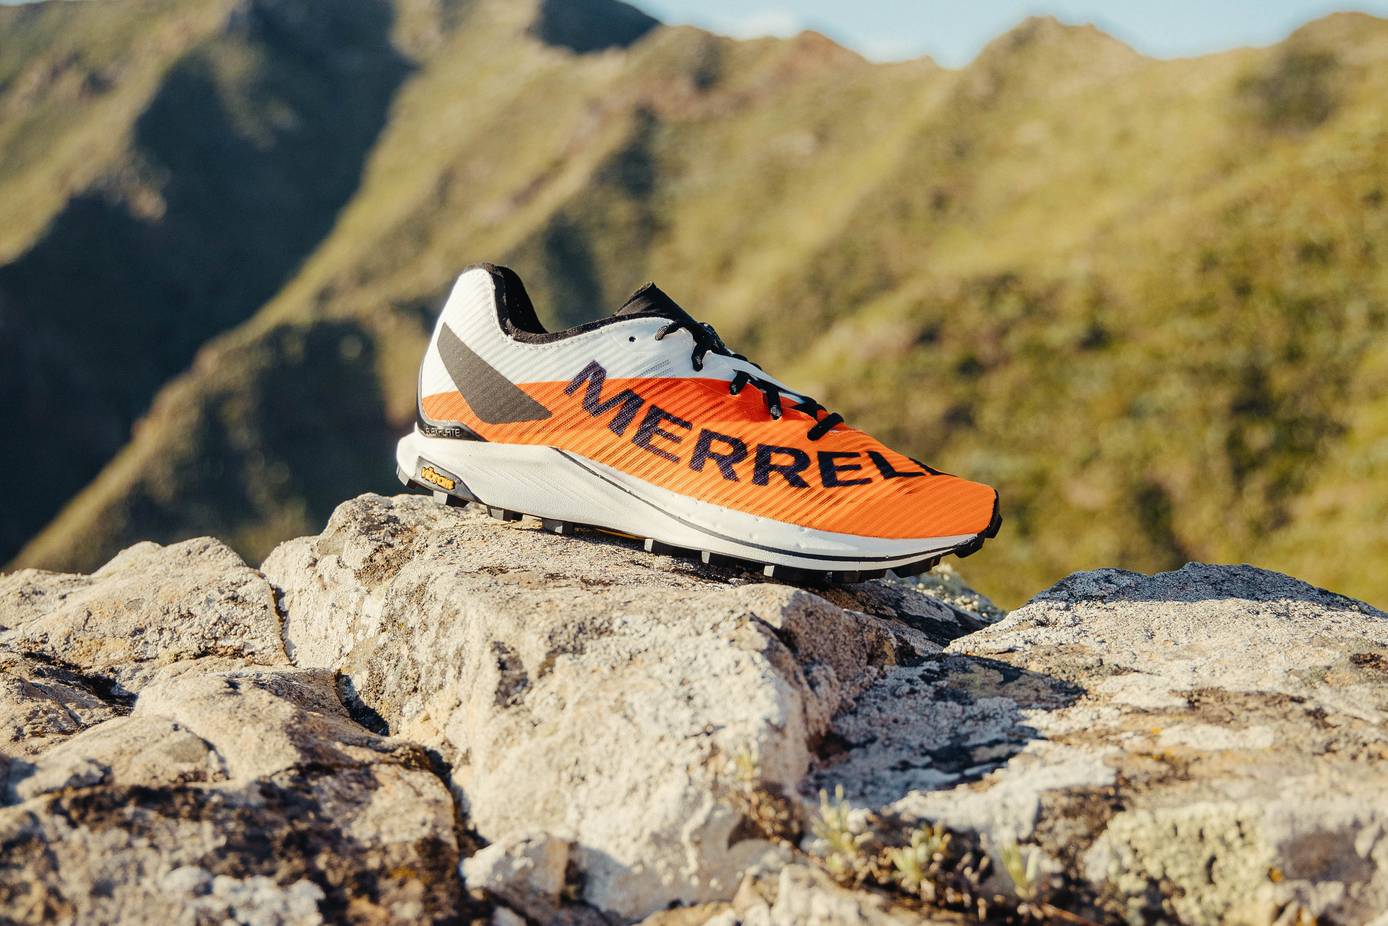 Introducing Merrell's MTL Skyfire 2: their lightest and fastest trail shoe  ever created